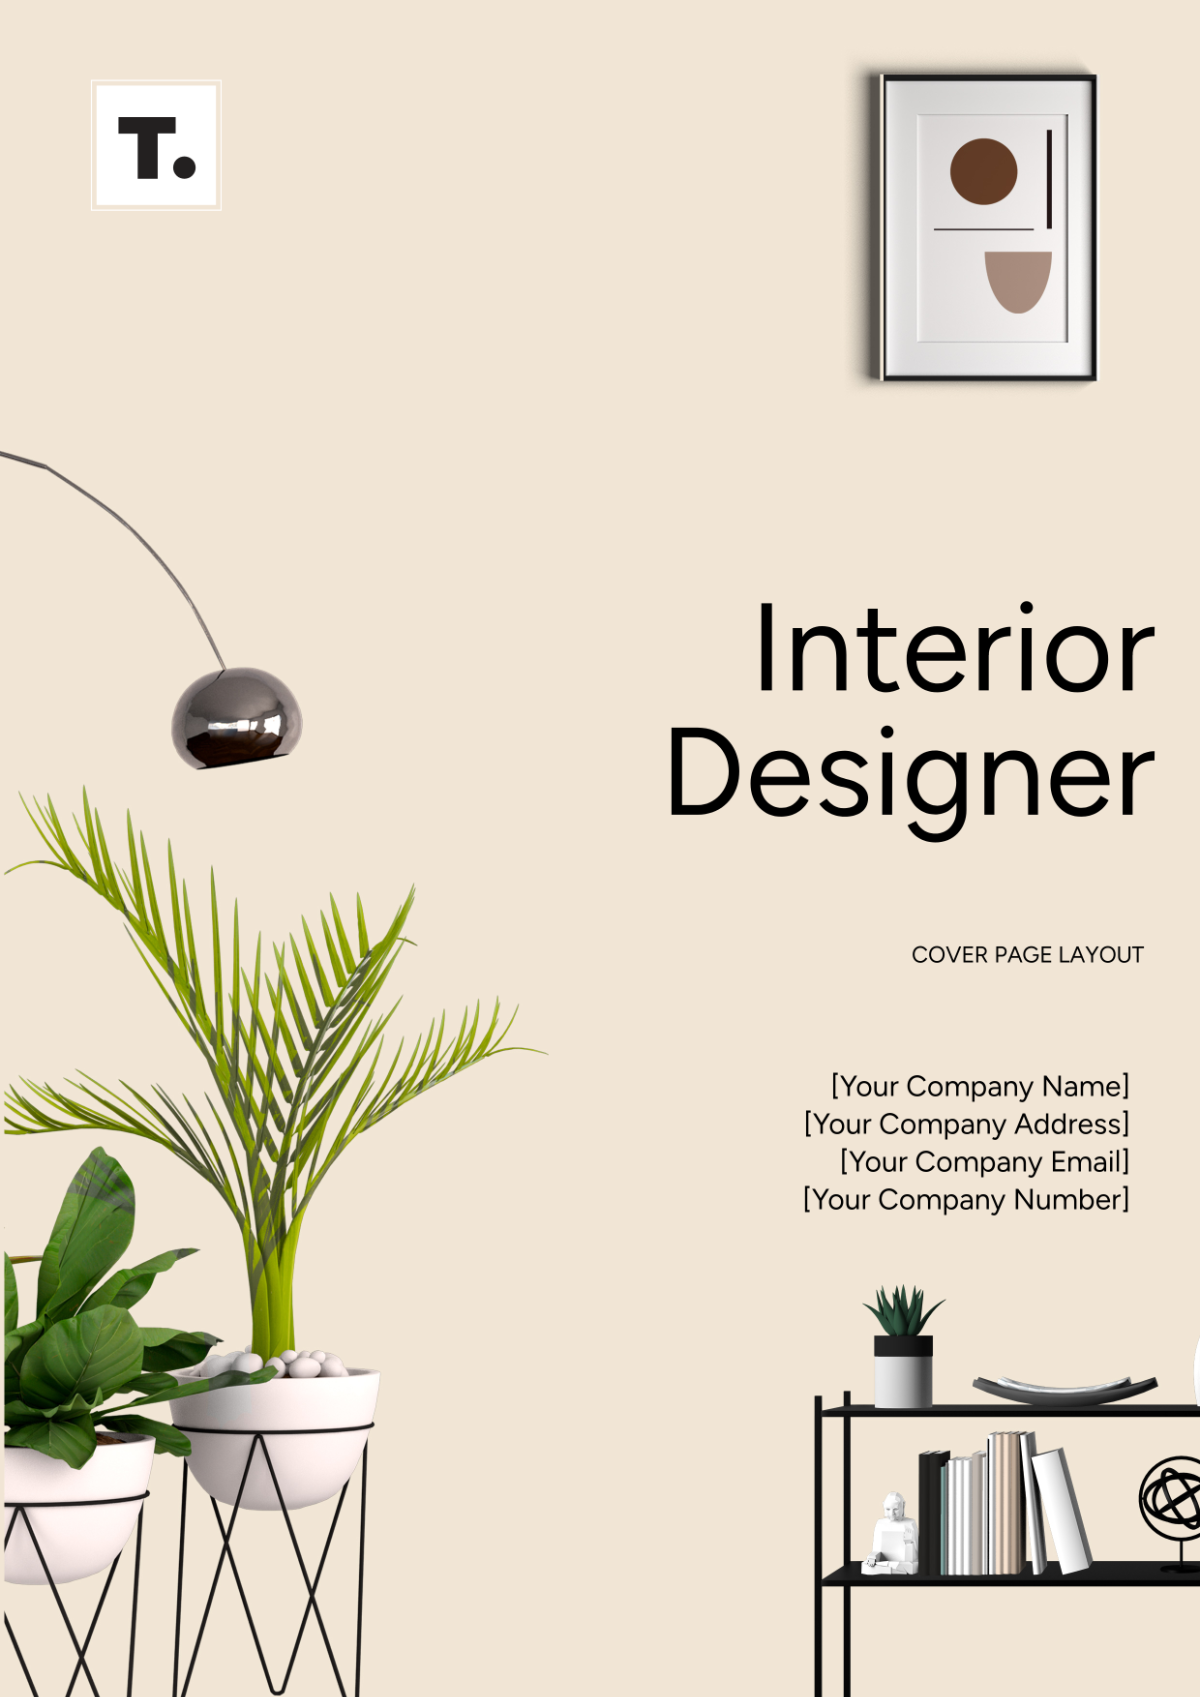 Interior Designer Cover Page Layout